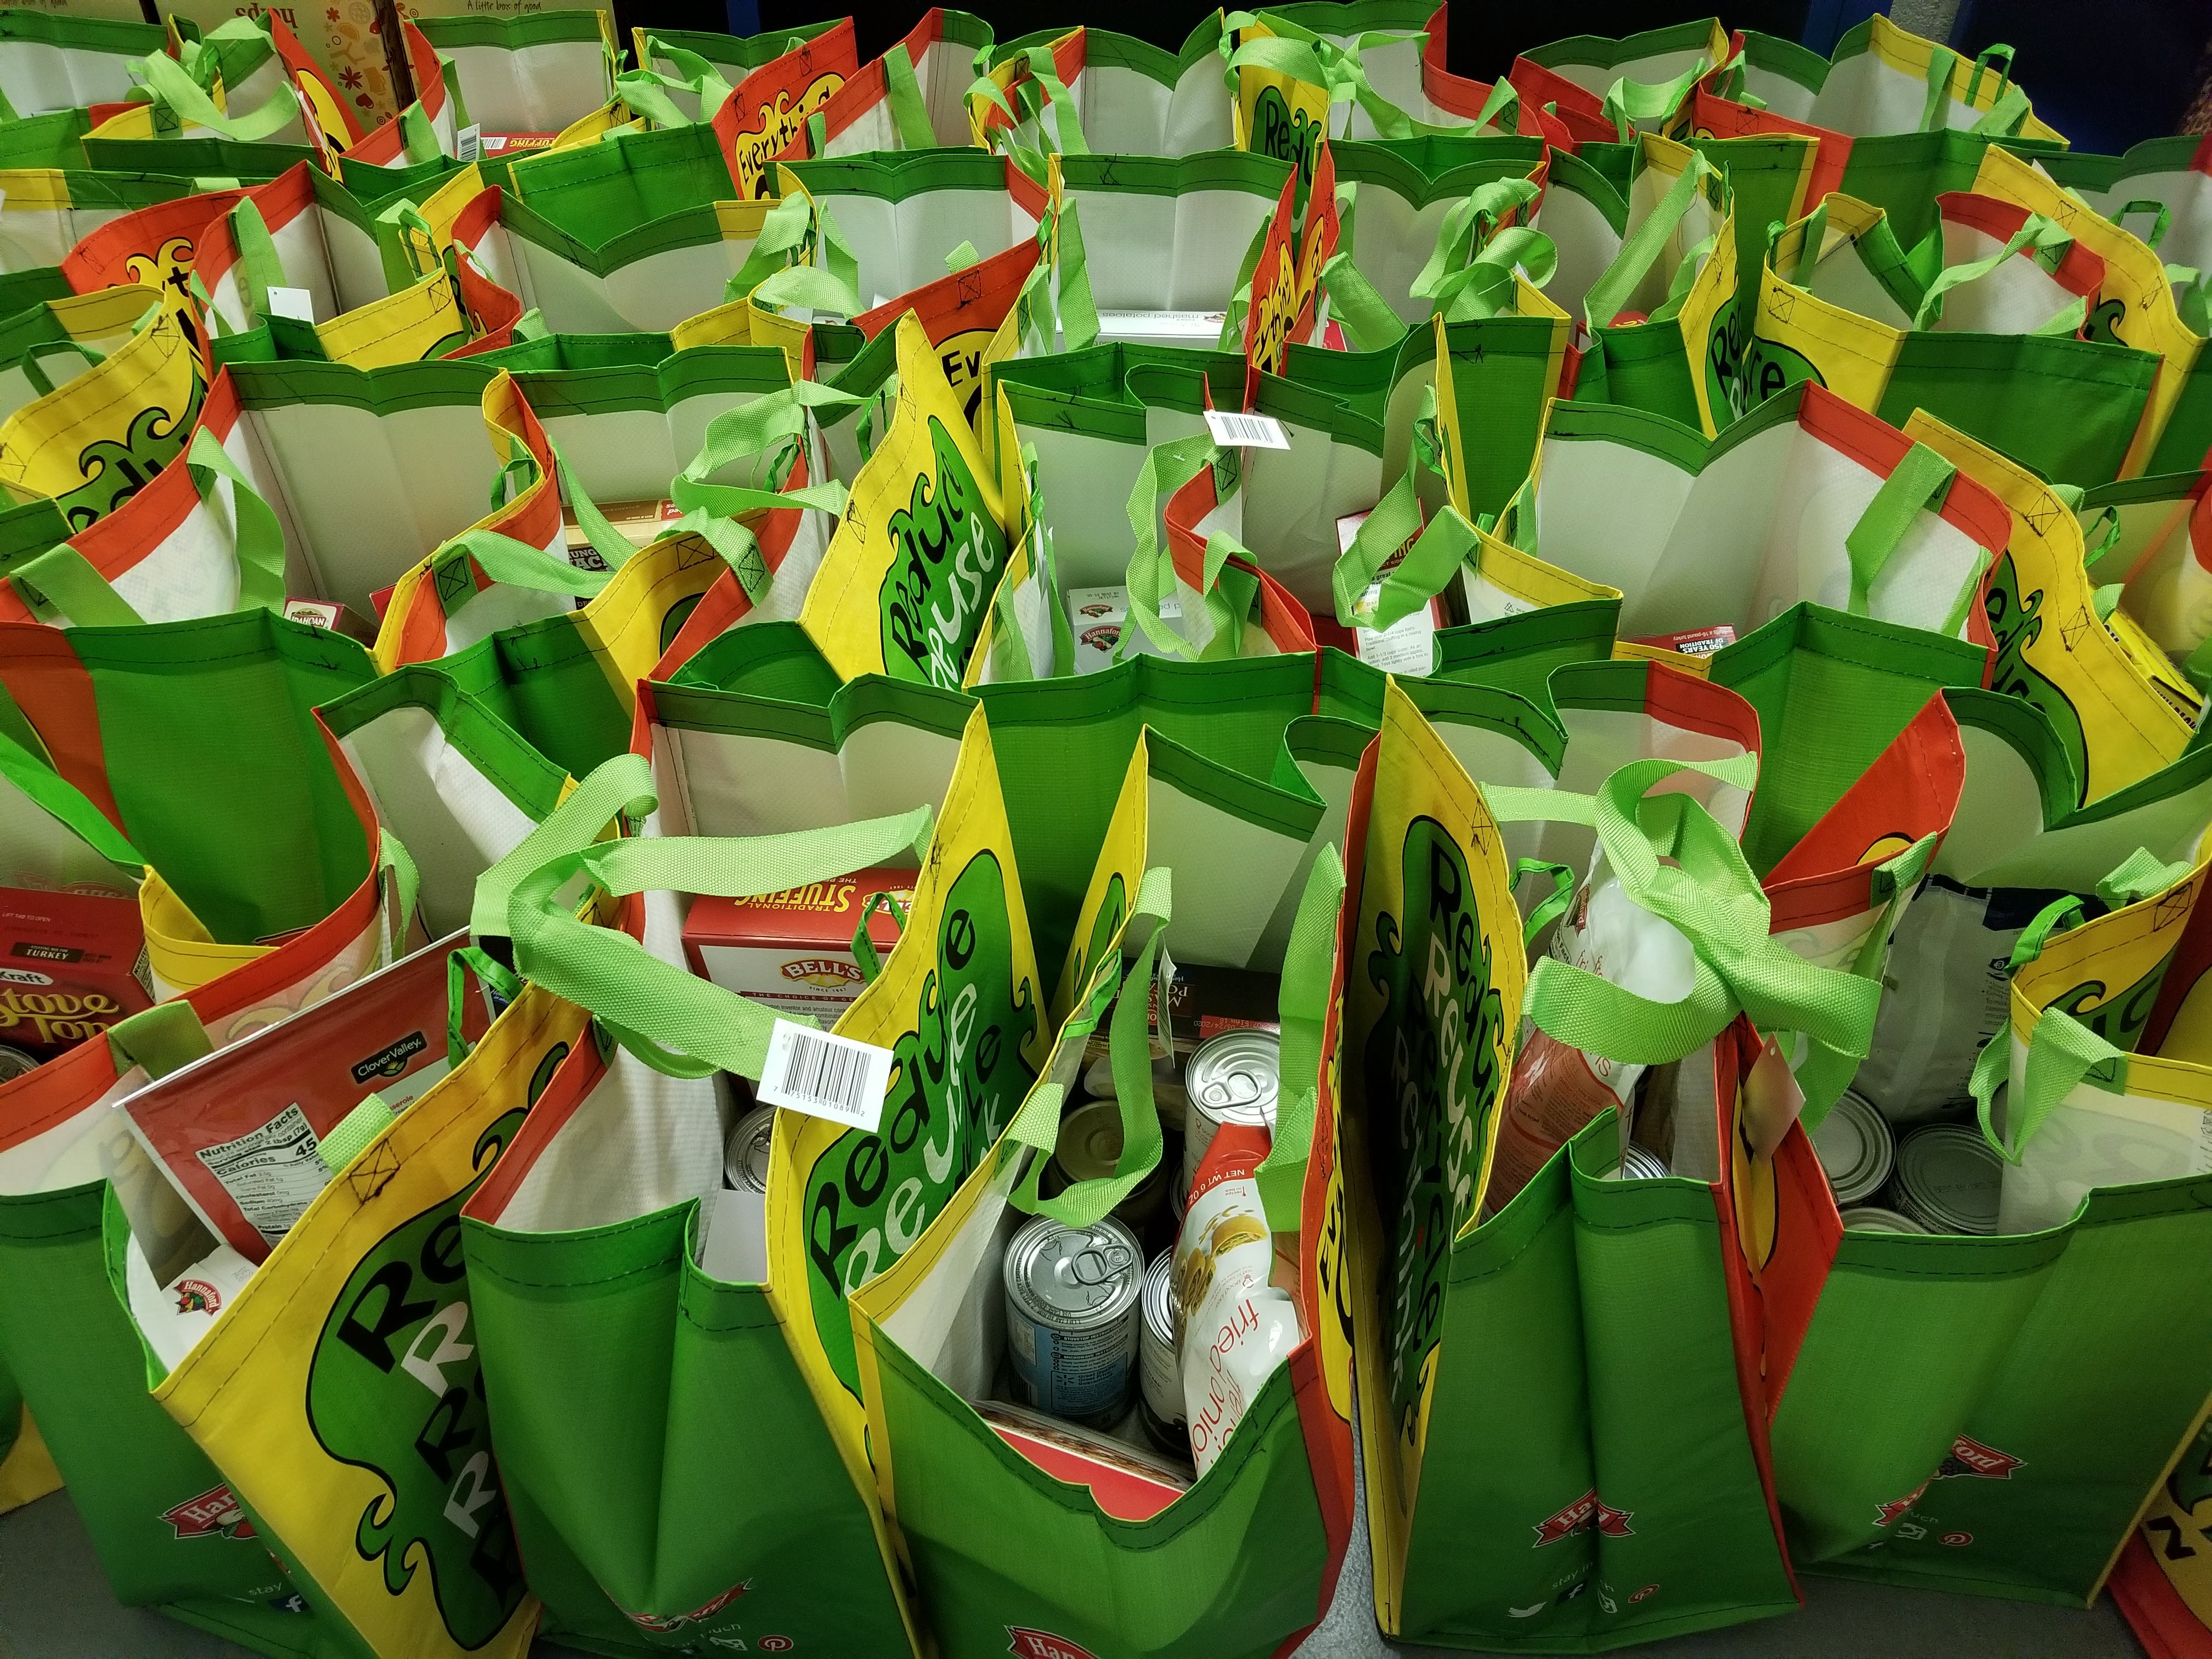 Reusable bags packed with food items.